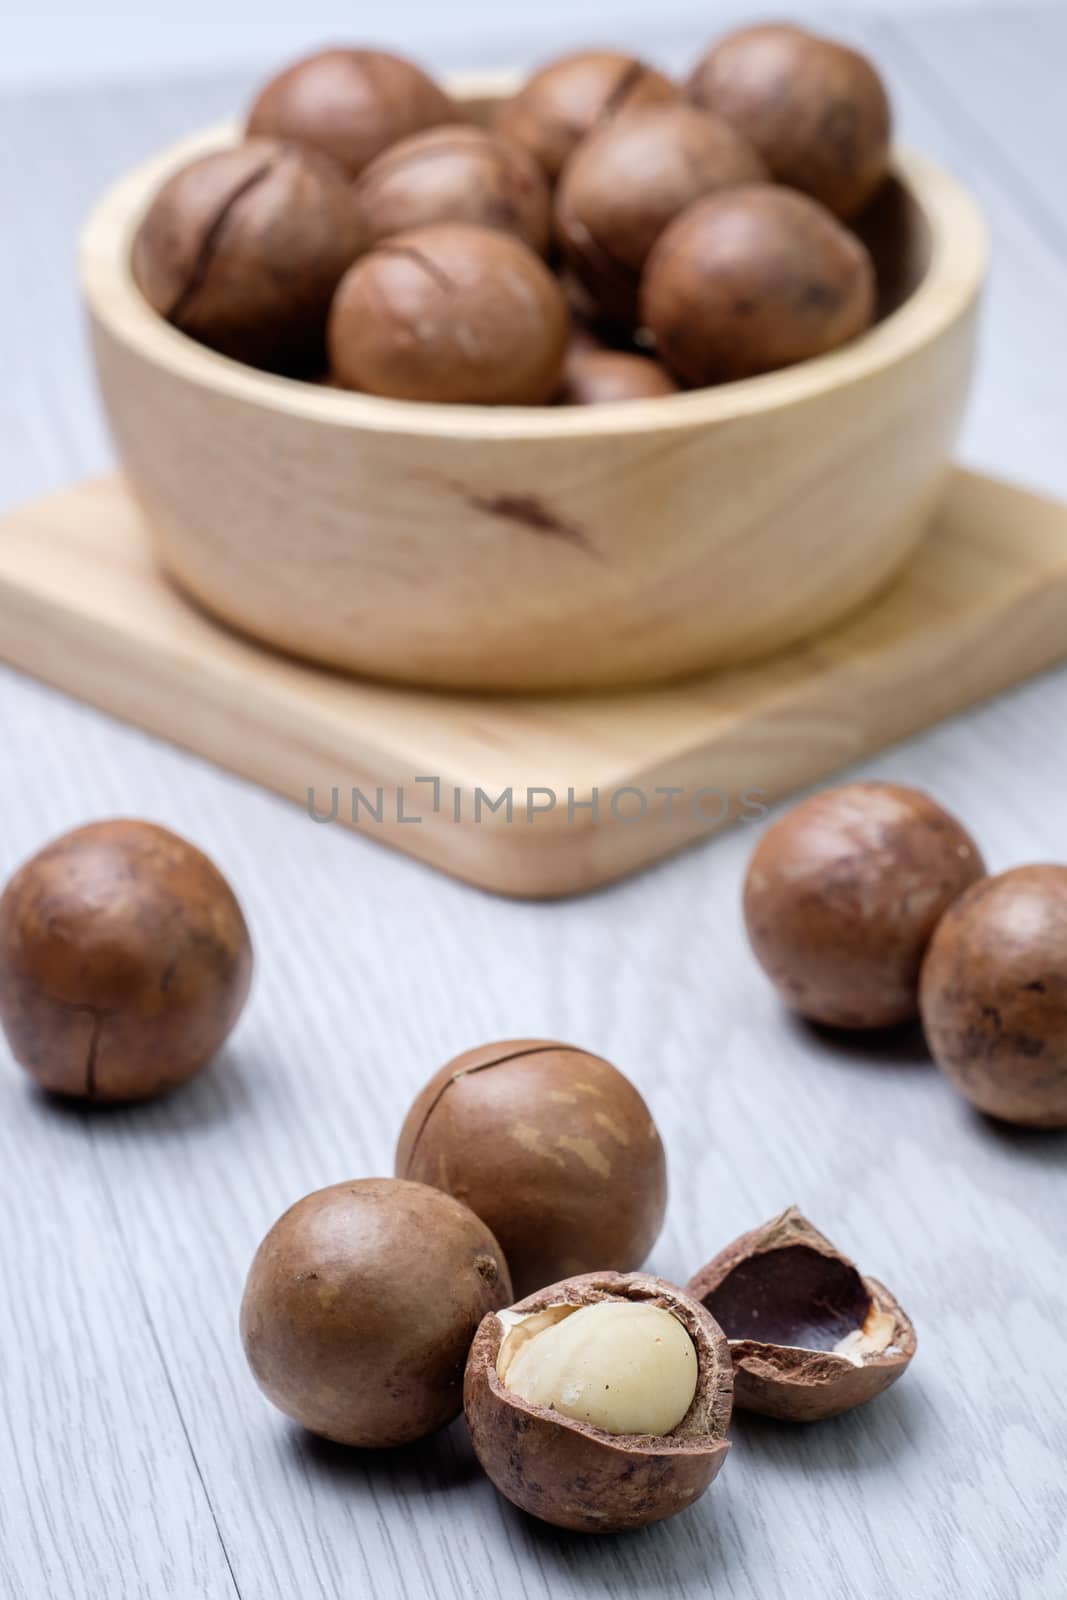 Macadamia in wooden bowl on white wooden table